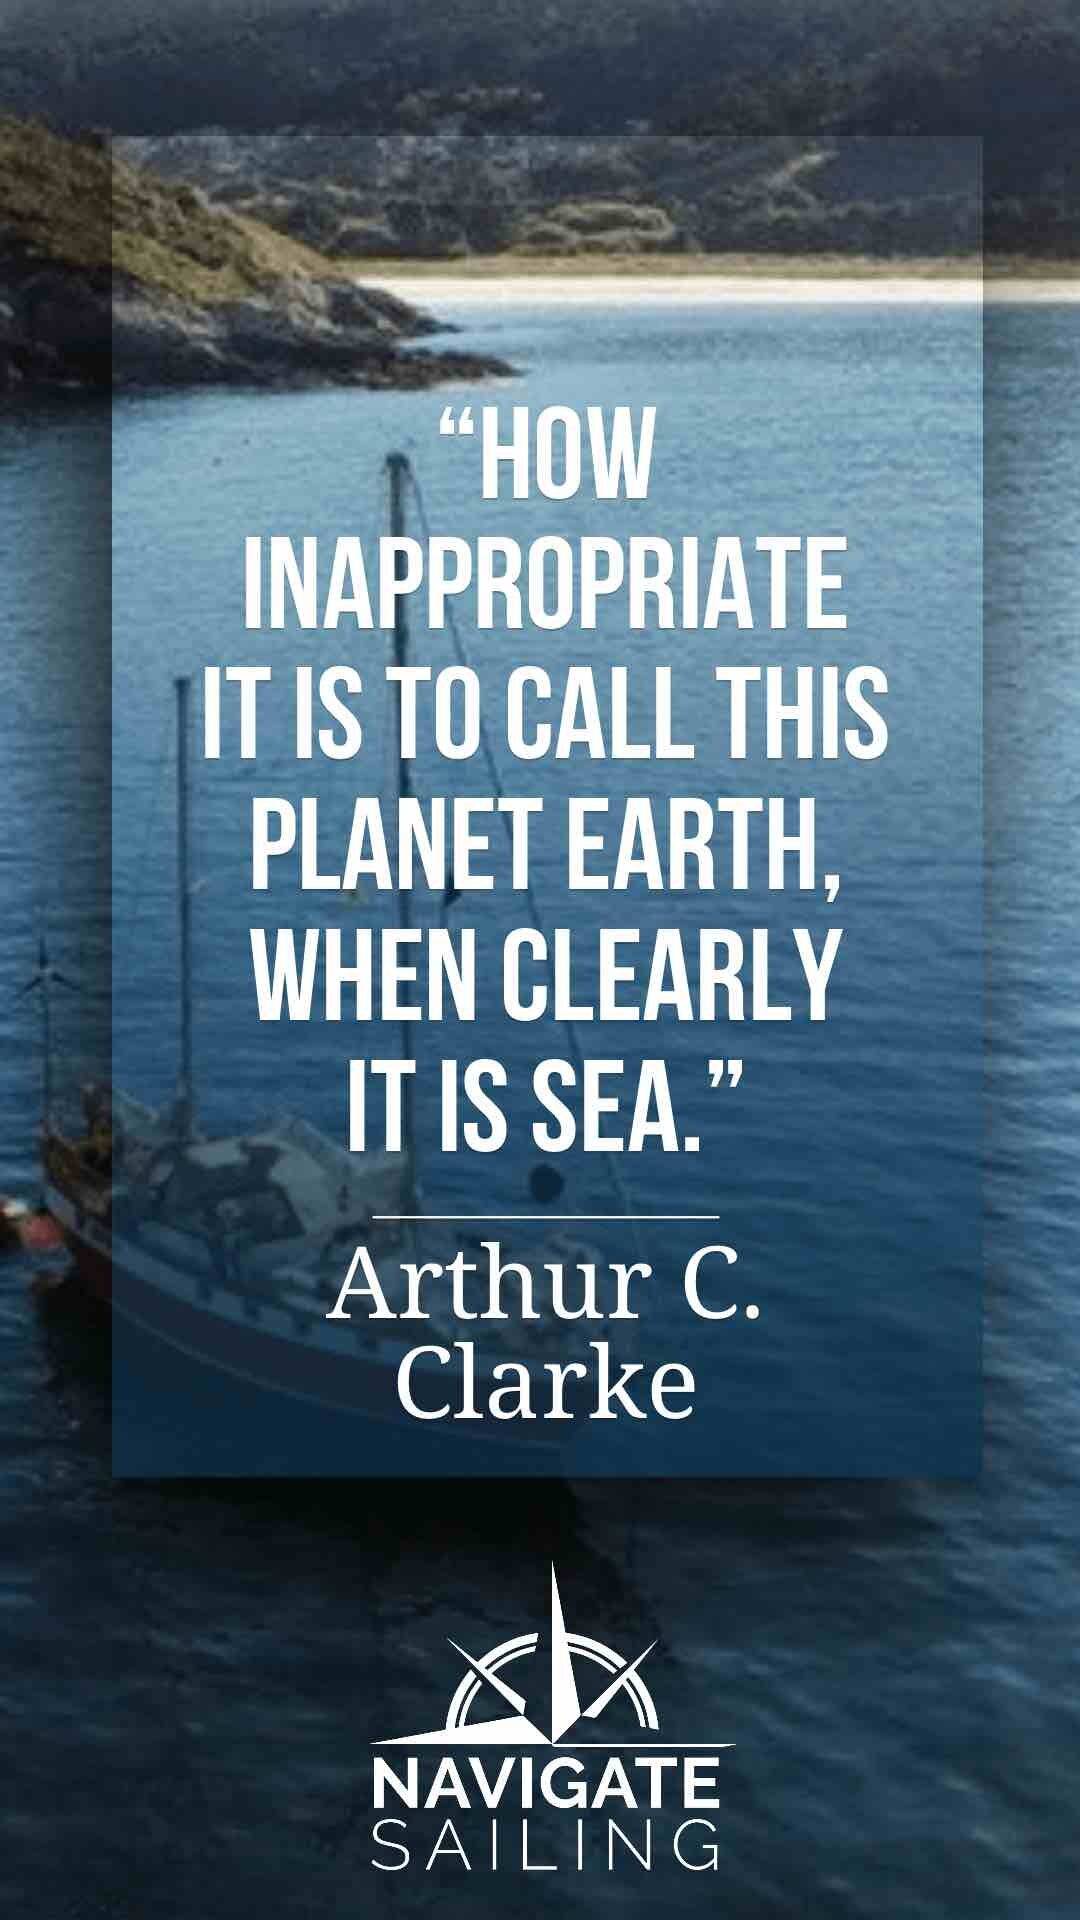 Sailing and Sea inspiration from Arthur C. Clarke